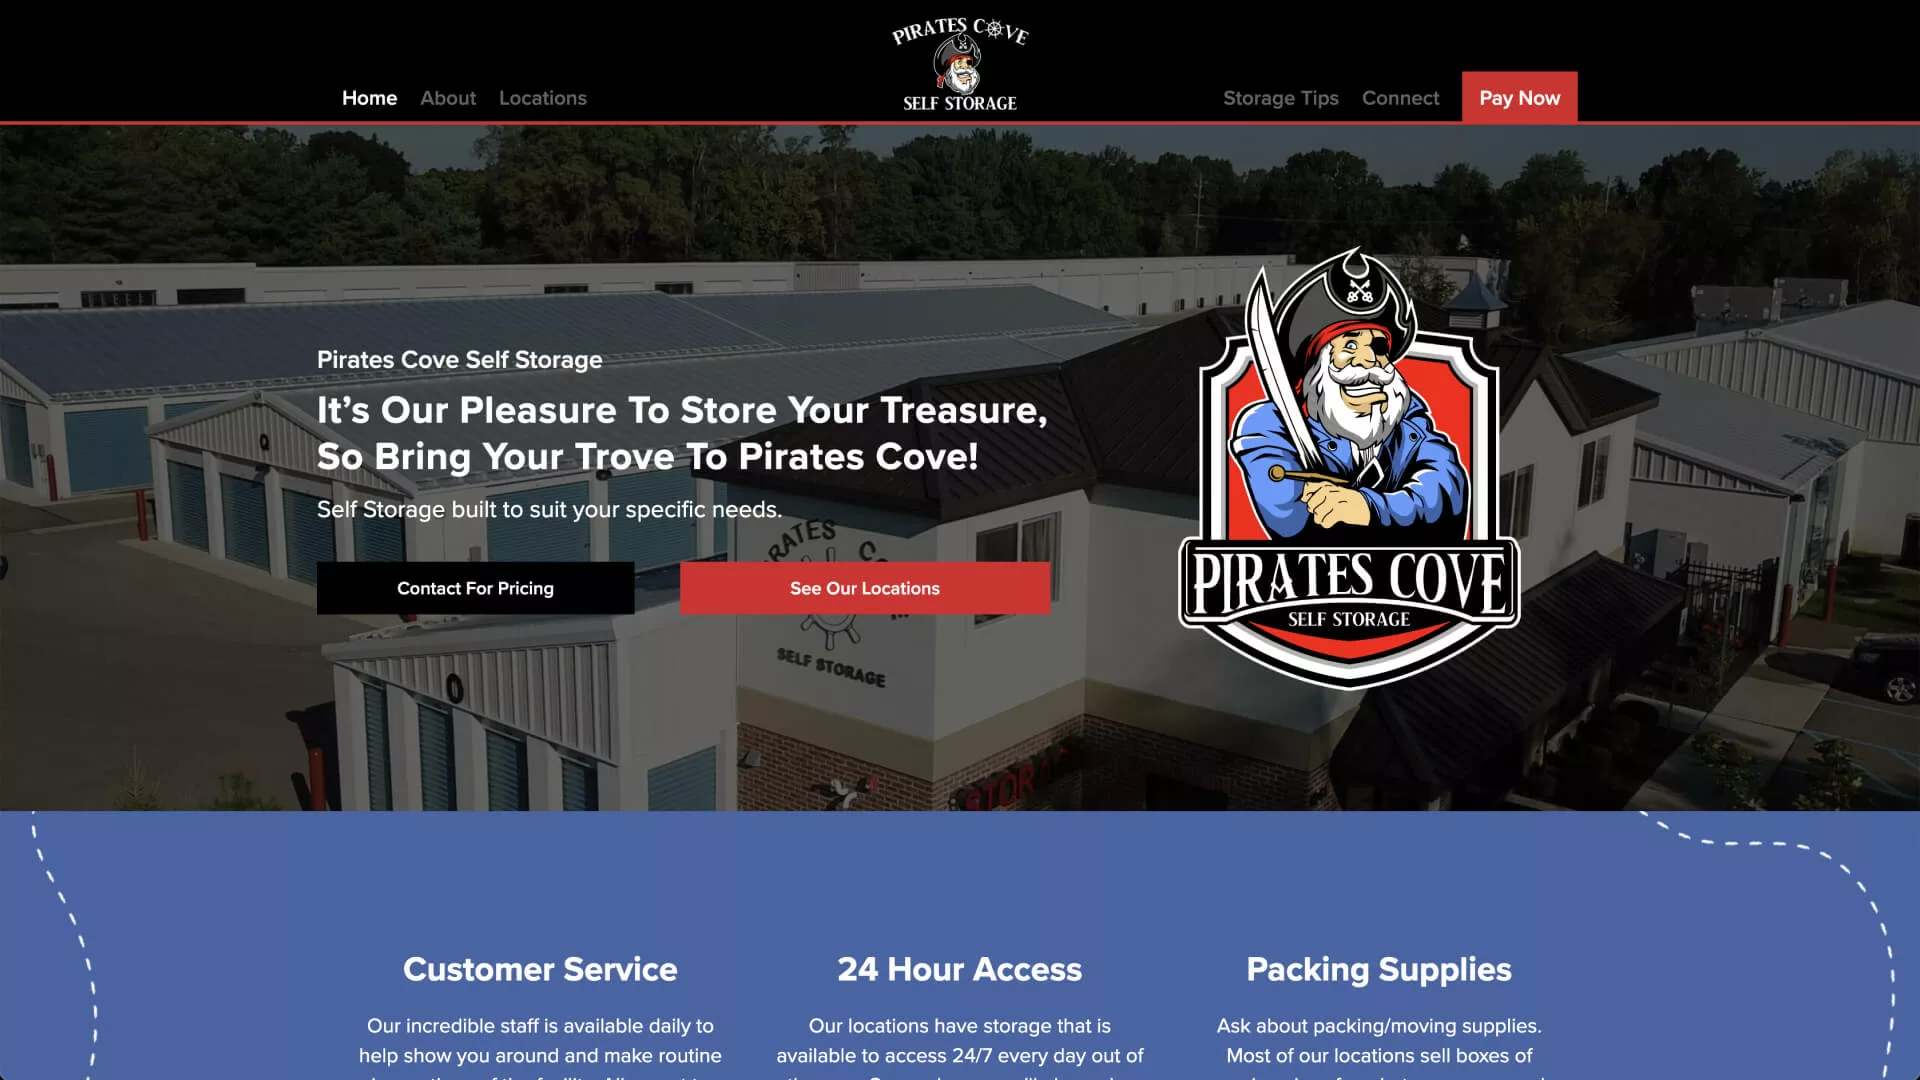 Pawn Design Group's Redesign of Pirates Cove's Website